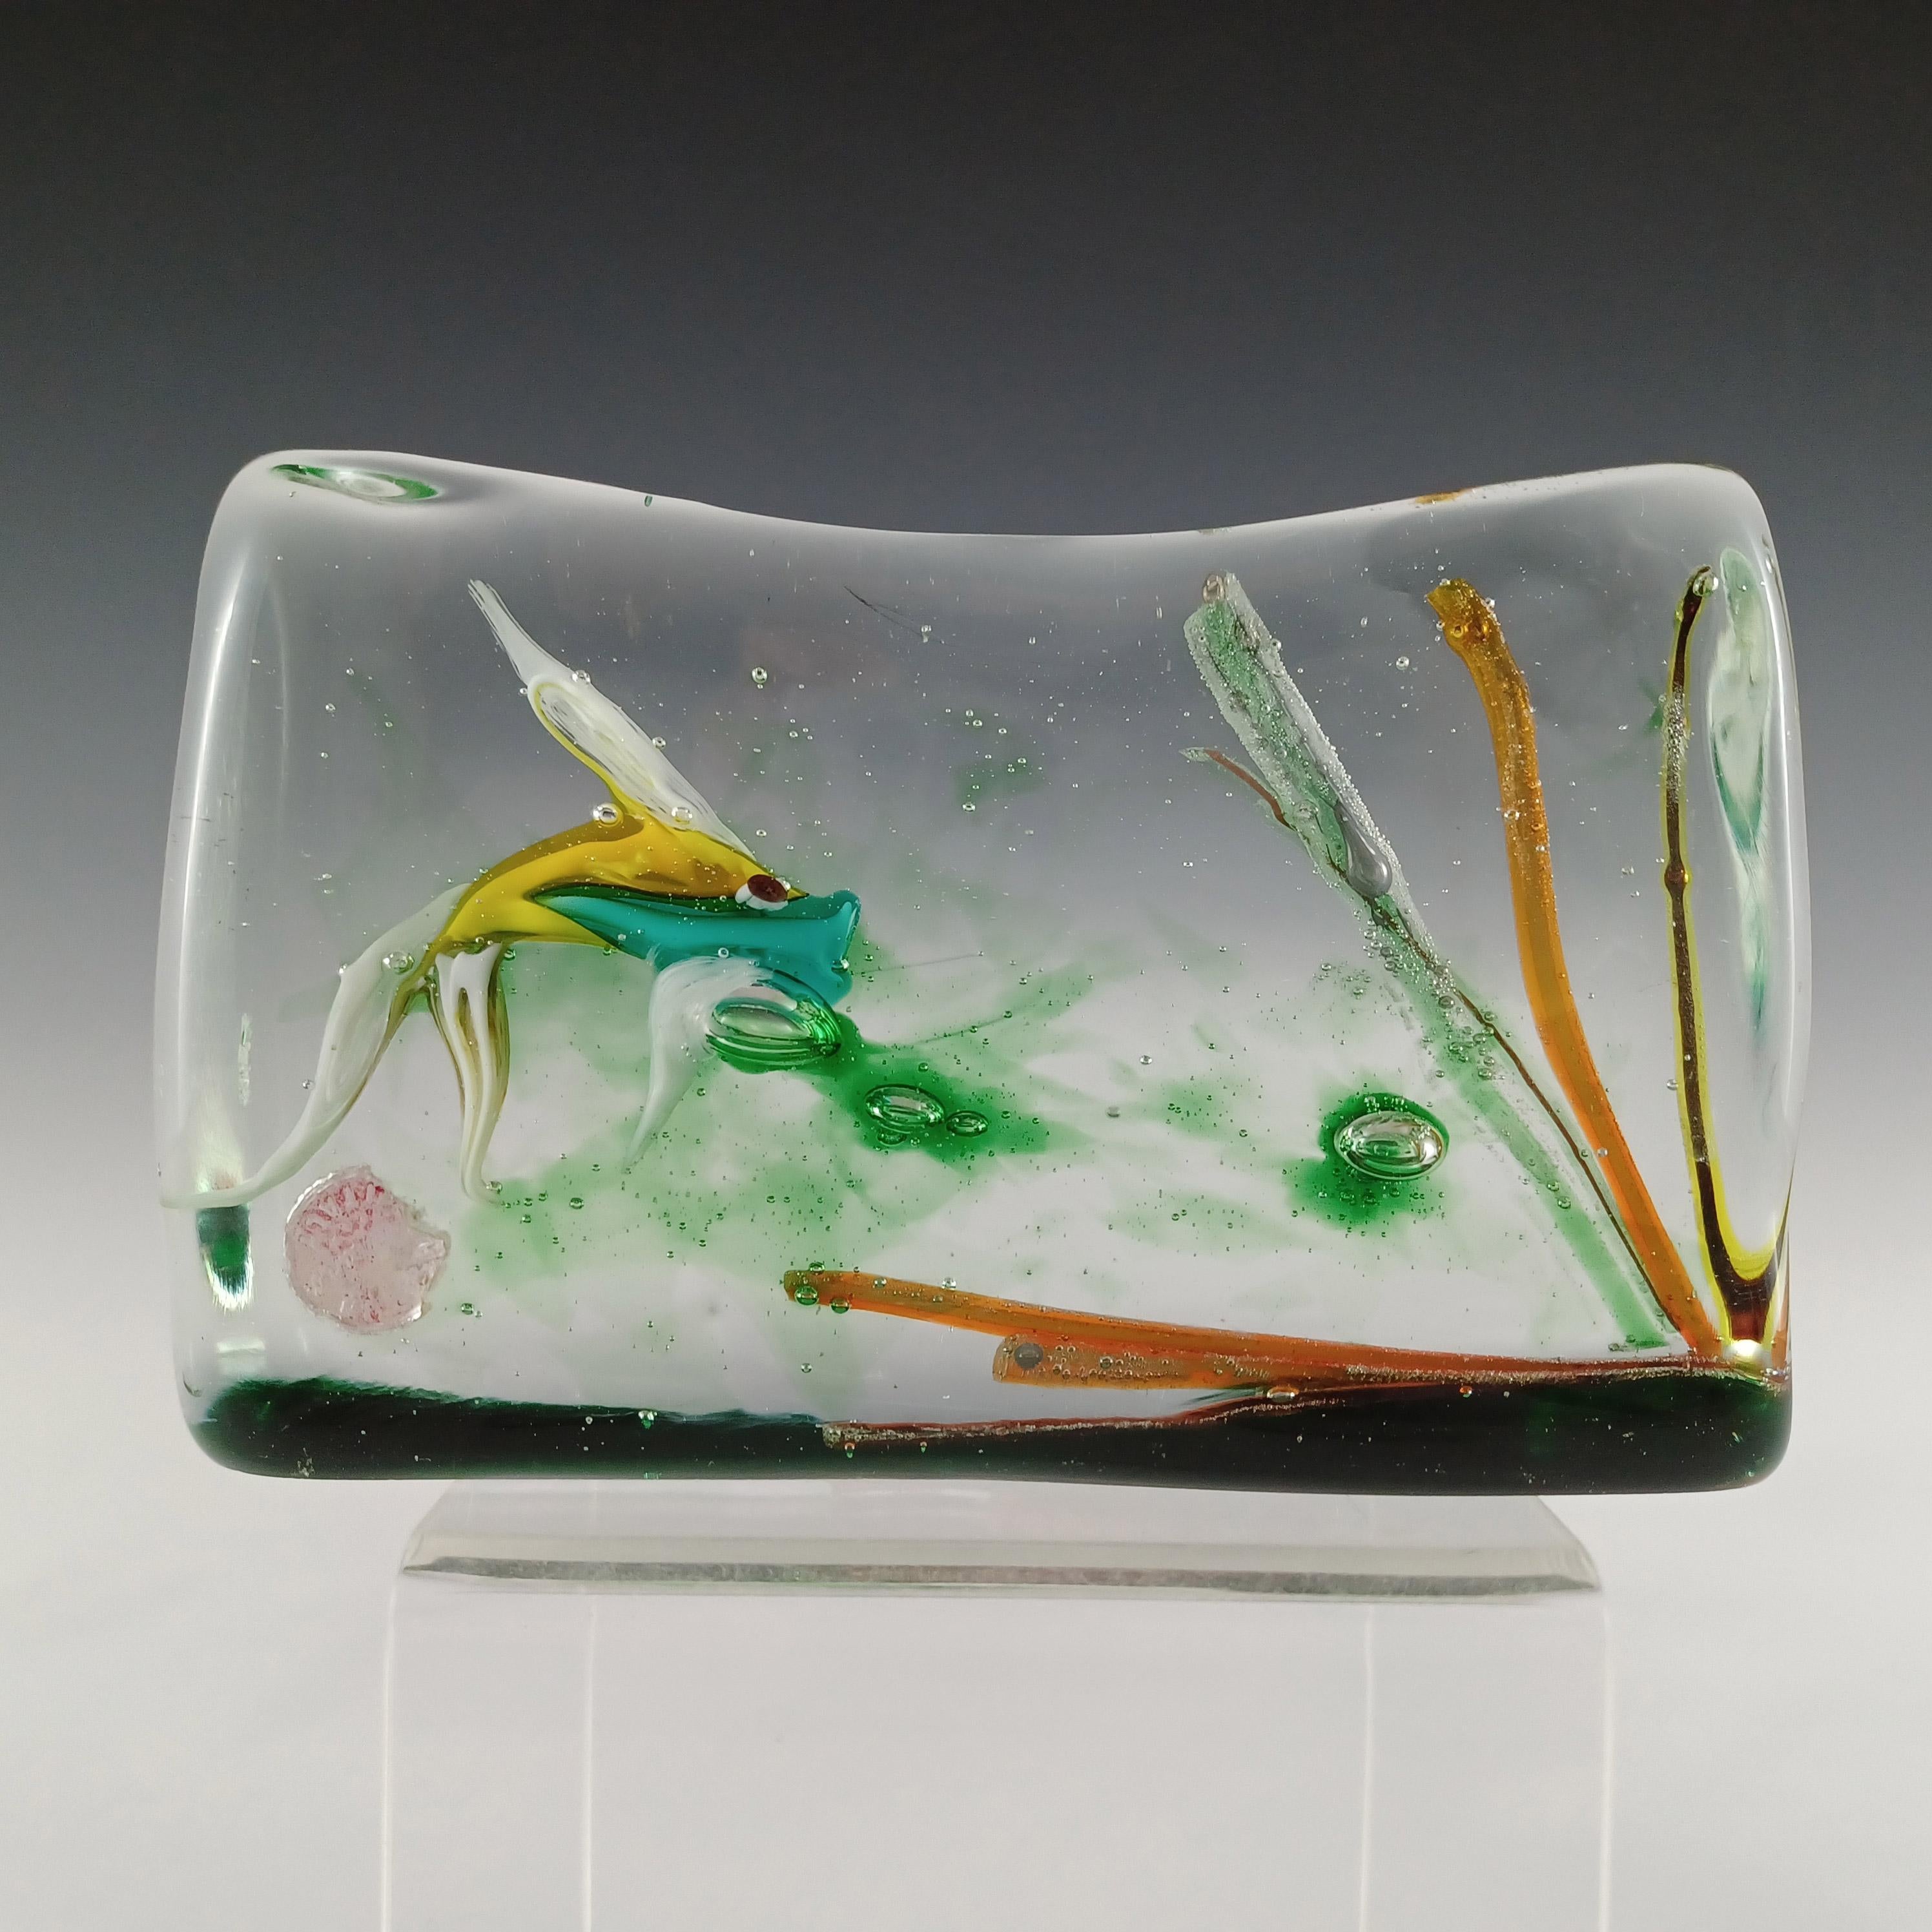 Here is a beautiful 1950/60's Venetian glass fish aquarium block sculpture, made on the island of Murano, near Venice, Italy. Known factories that made these include Barbini, Cenedese, and AVEM. So far I haven't been able to identify which factory